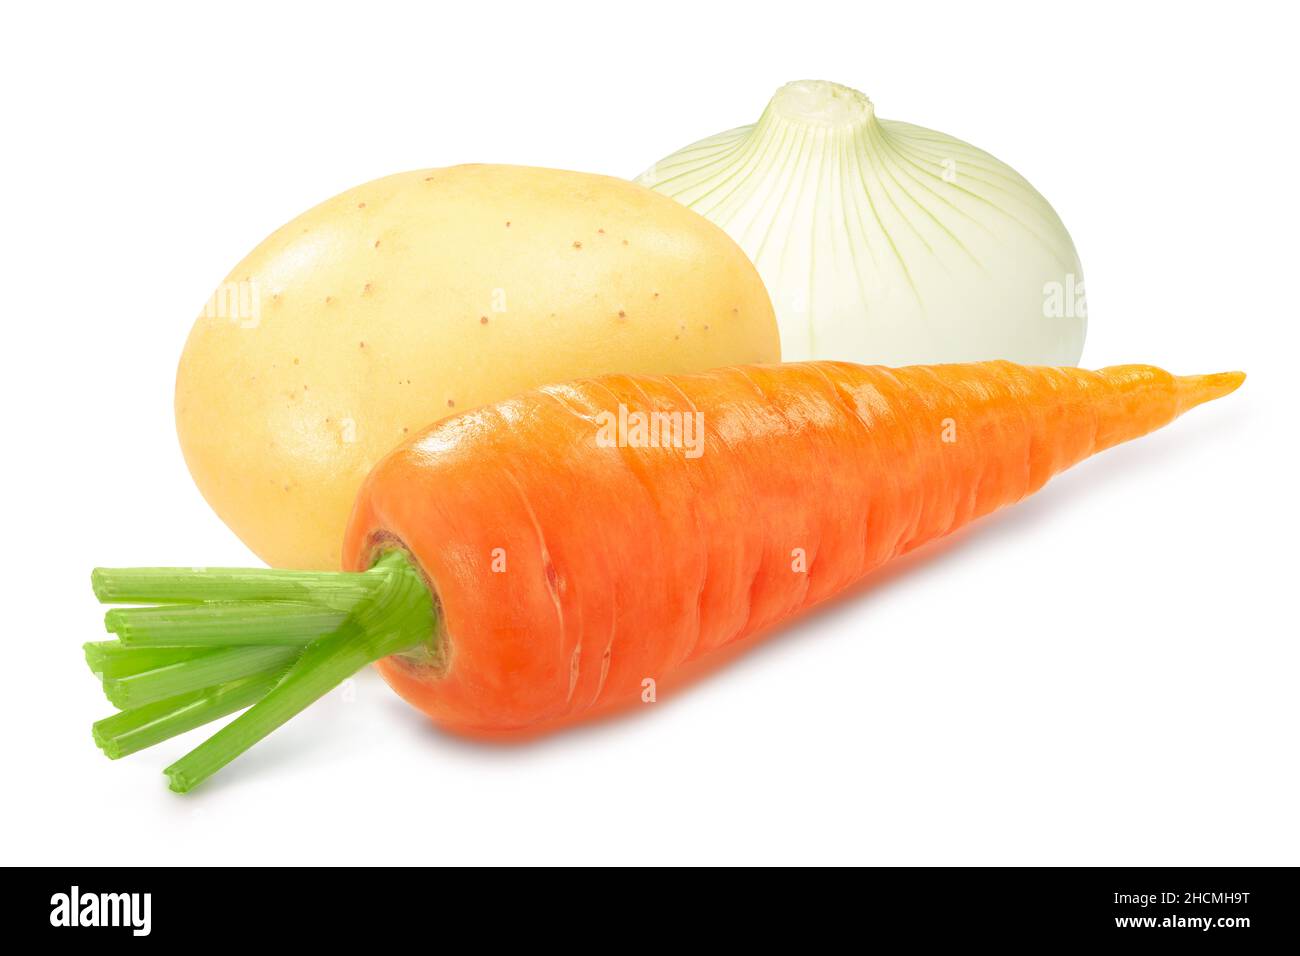 Whole washed carrot with potato and white onion bulb isolated Stock Photo